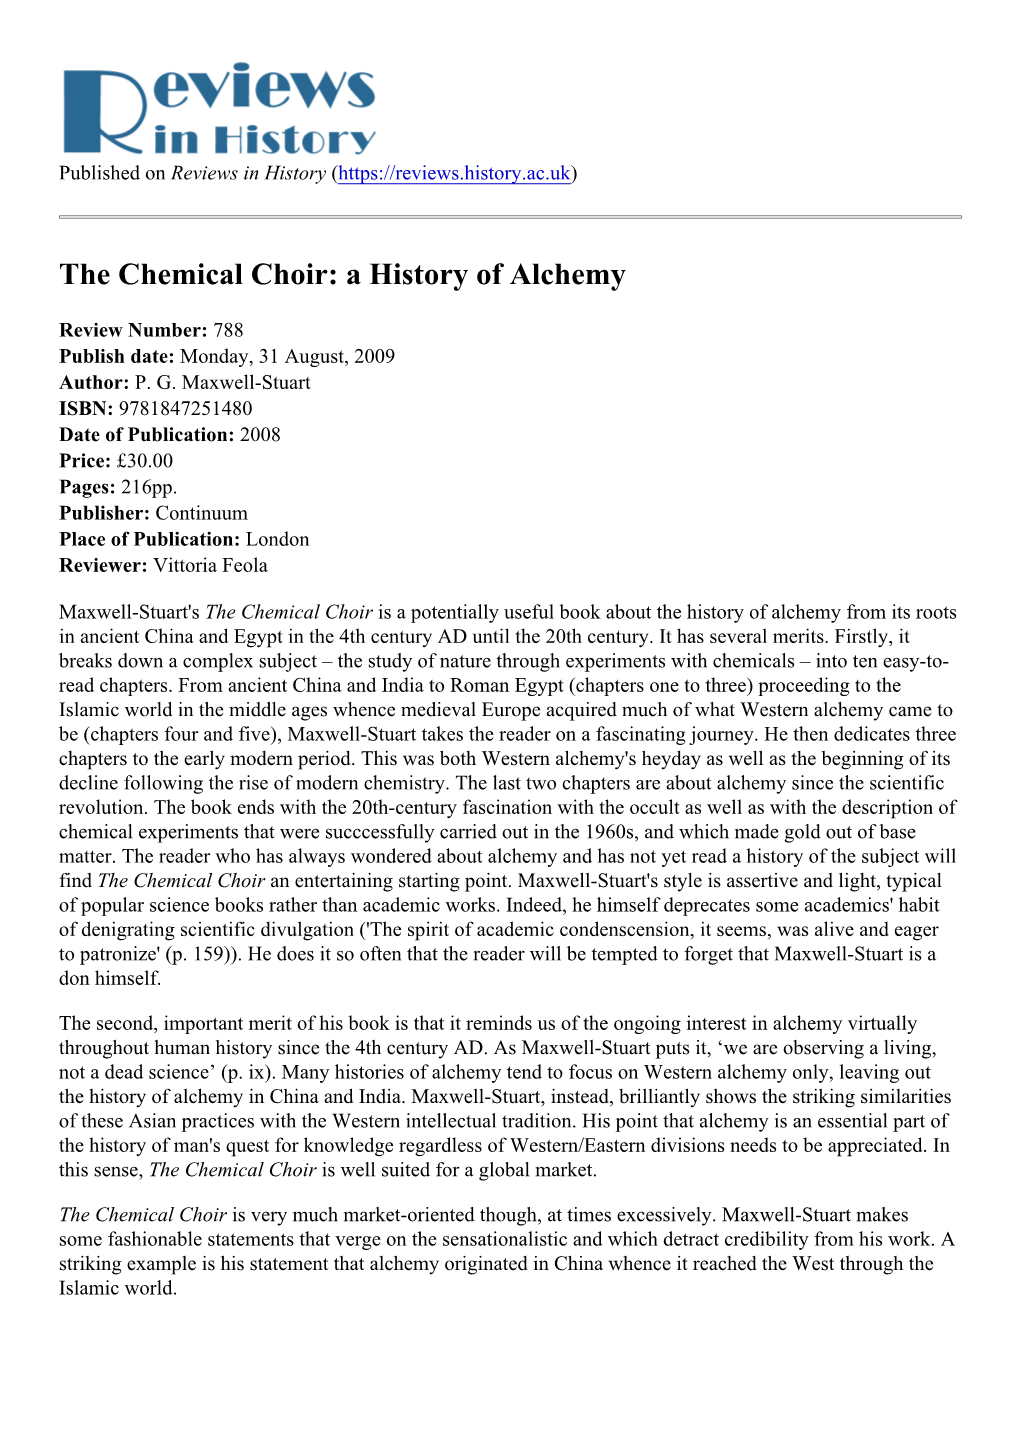 The Chemical Choir: a History of Alchemy